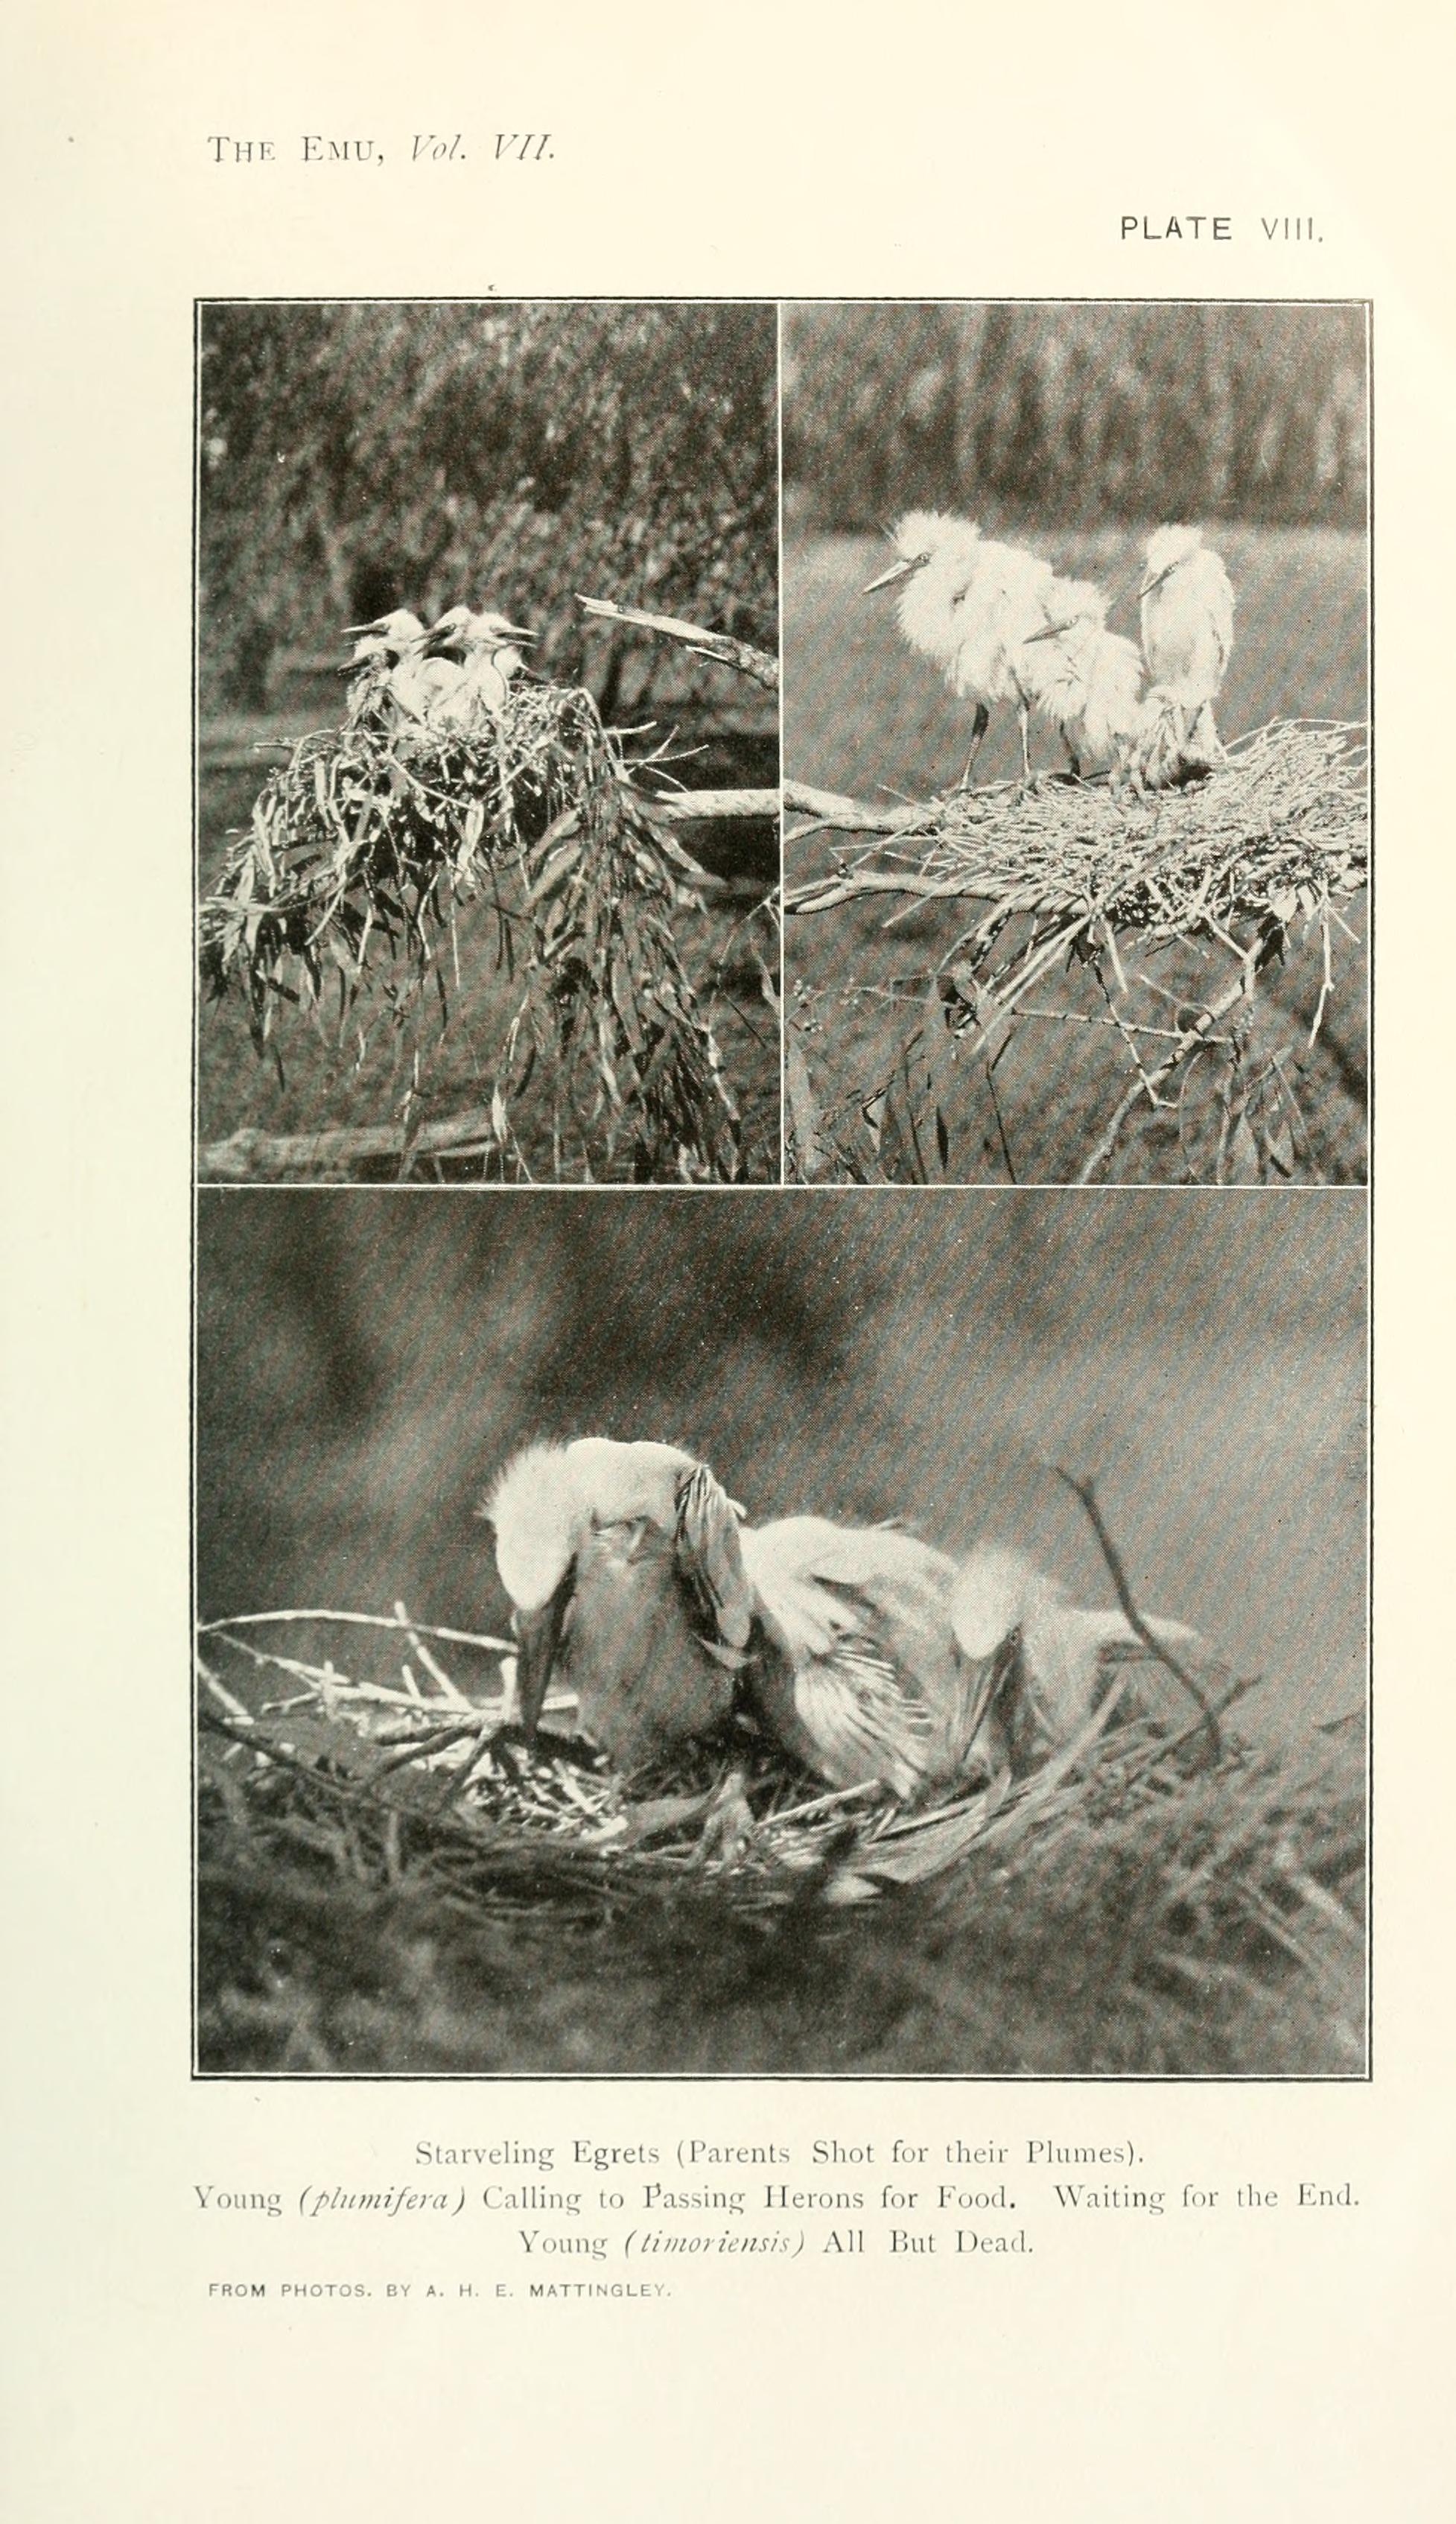 Orphaned baby egrets at nests begging for food.